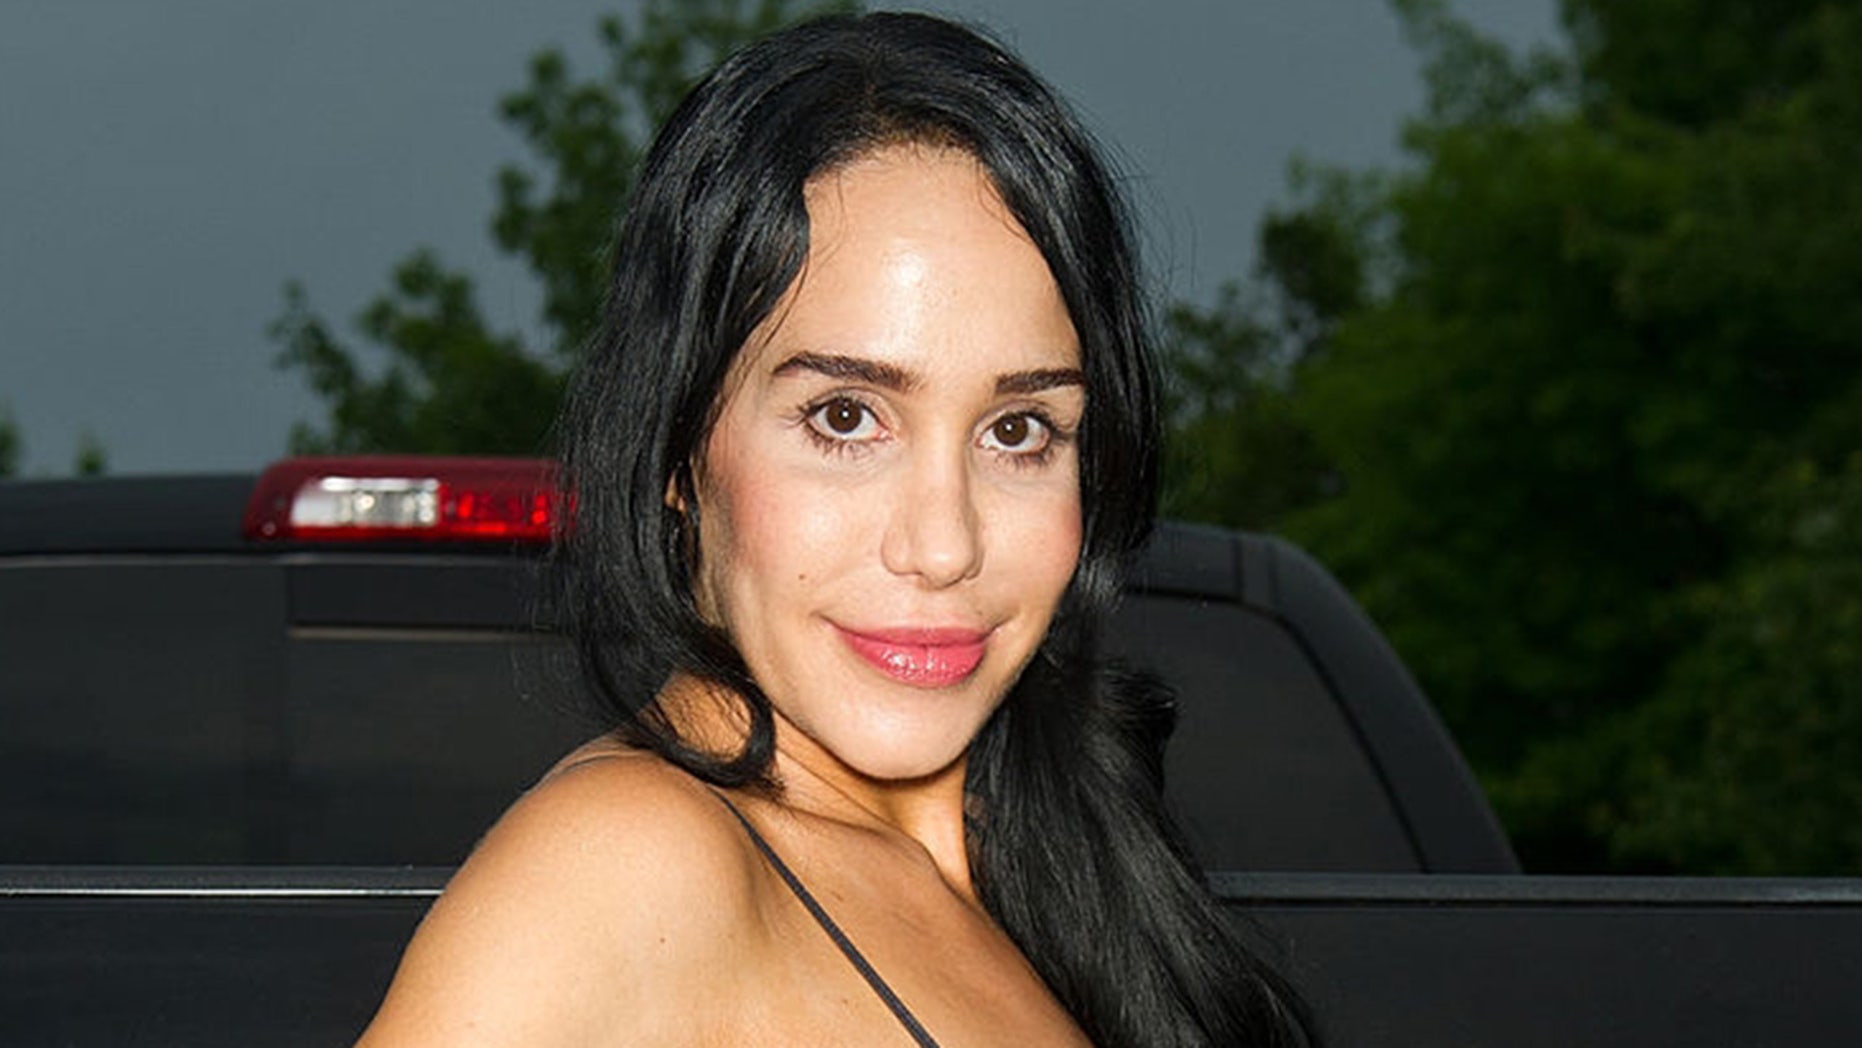 Octomom Nadya Suleman opens up about her porn past: 'I hit ...